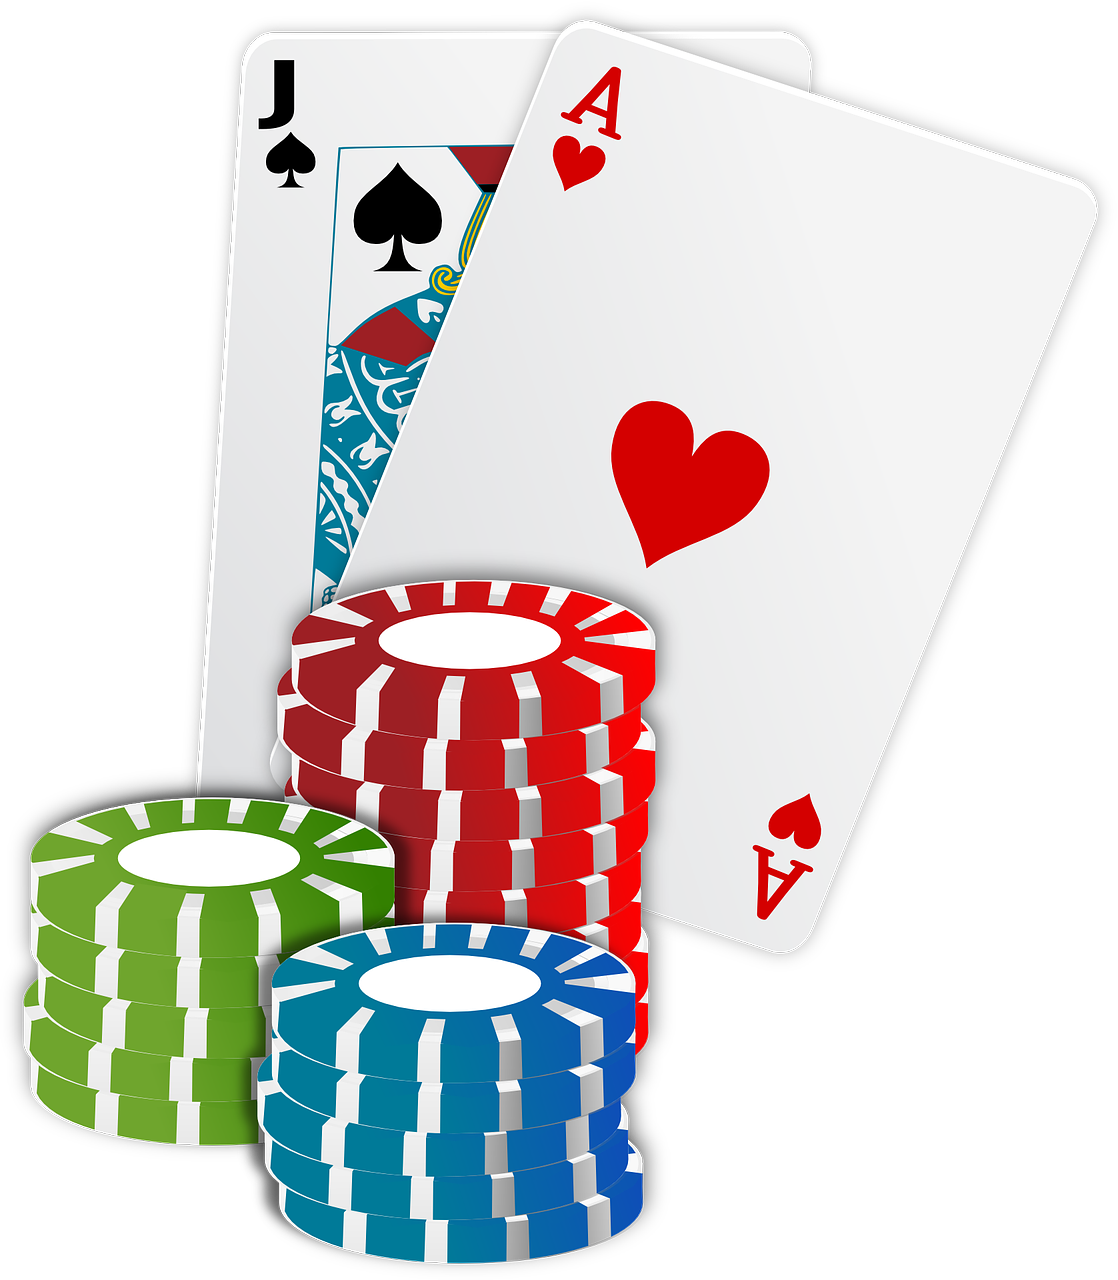 Play poker games